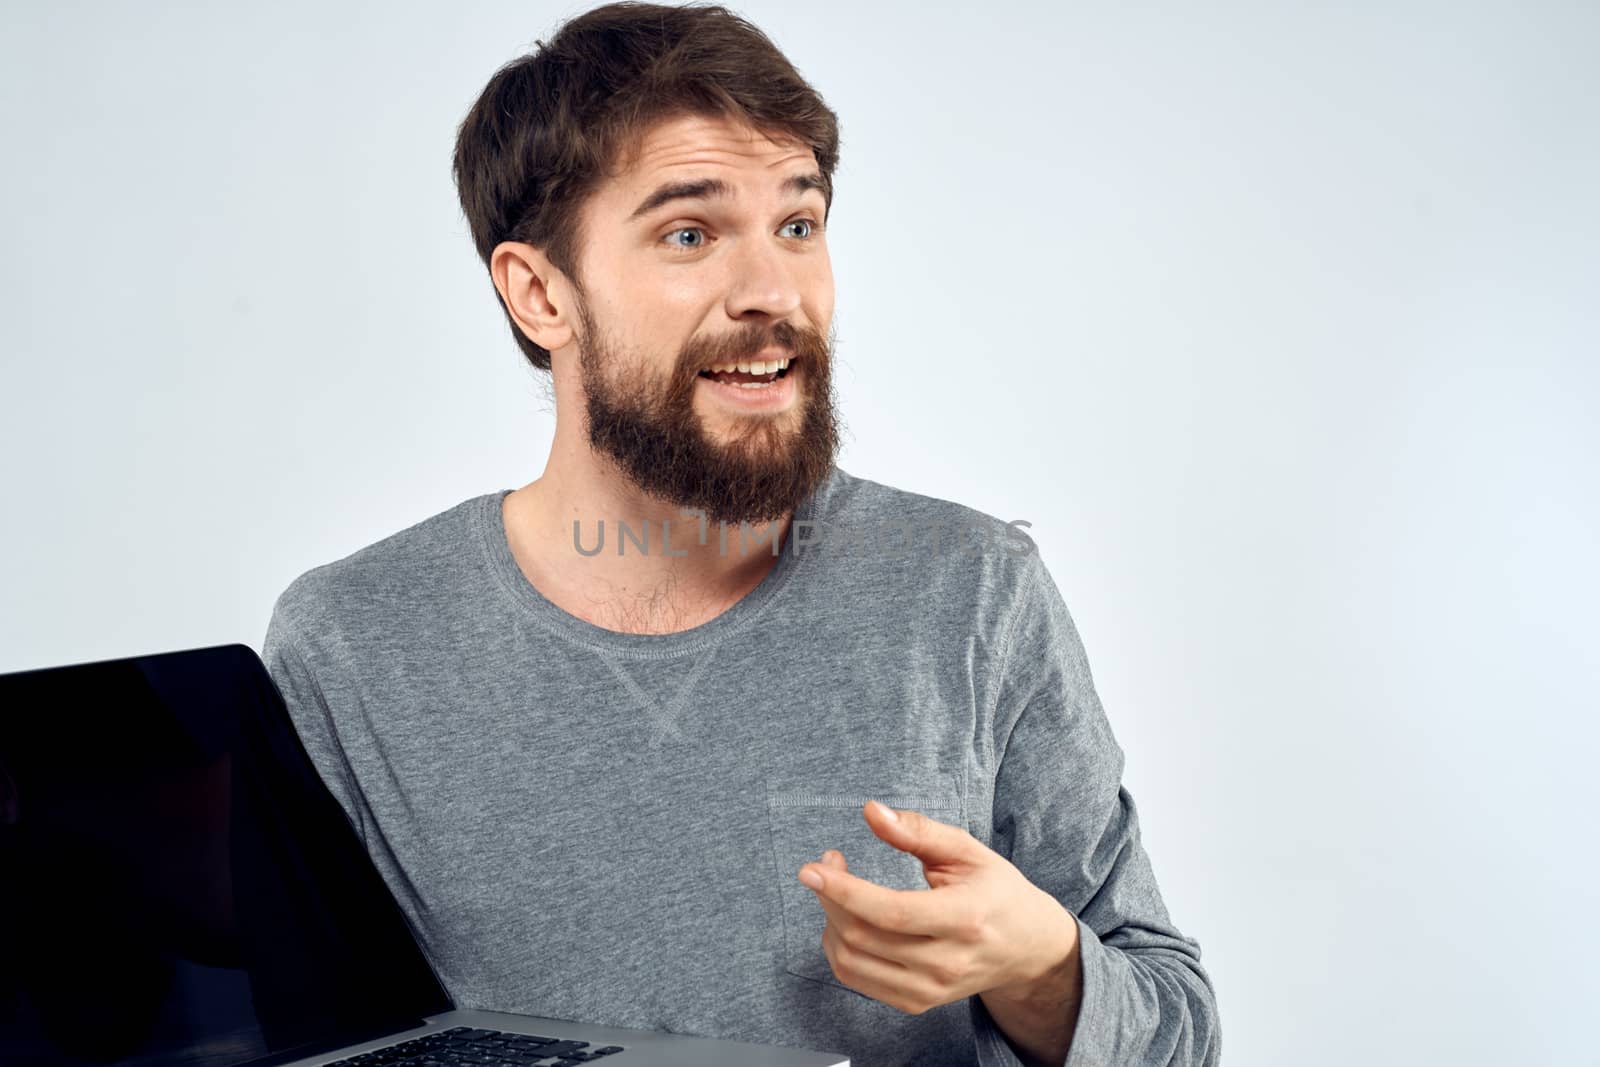 A man in a gray sweater with a laptop hands lifestyle technology communication internet work by SHOTPRIME